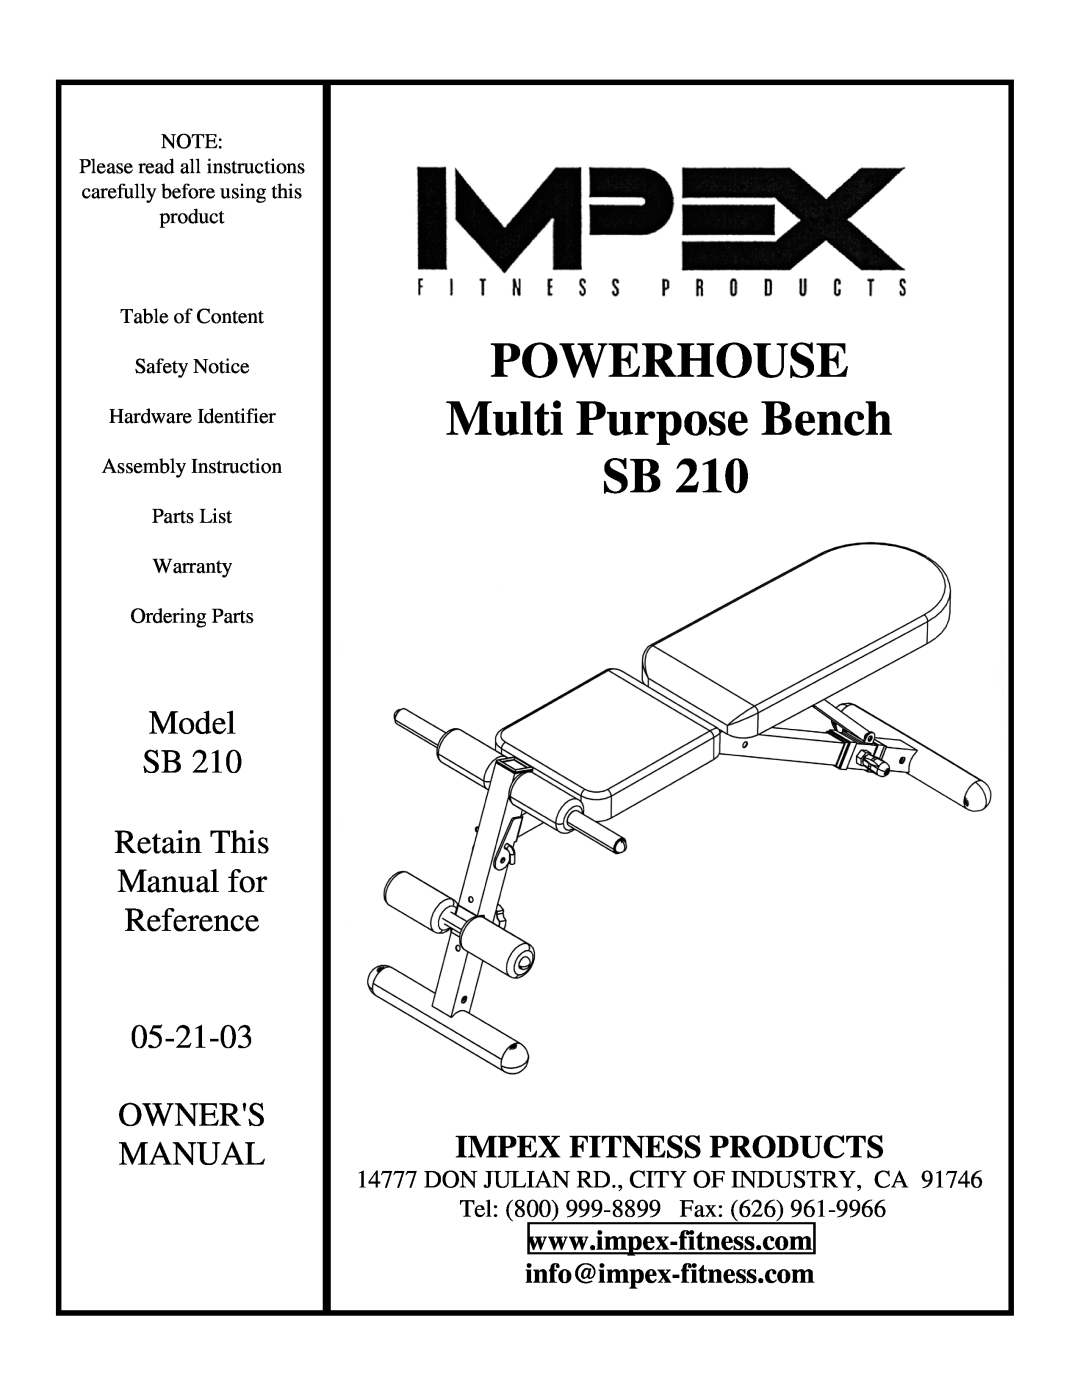 Impex SB 210 manual POWERHOUSE Multi Purpose Bench SB, Model SB Retain This Manual for Reference 05-21-03 OWNERS MANUAL 